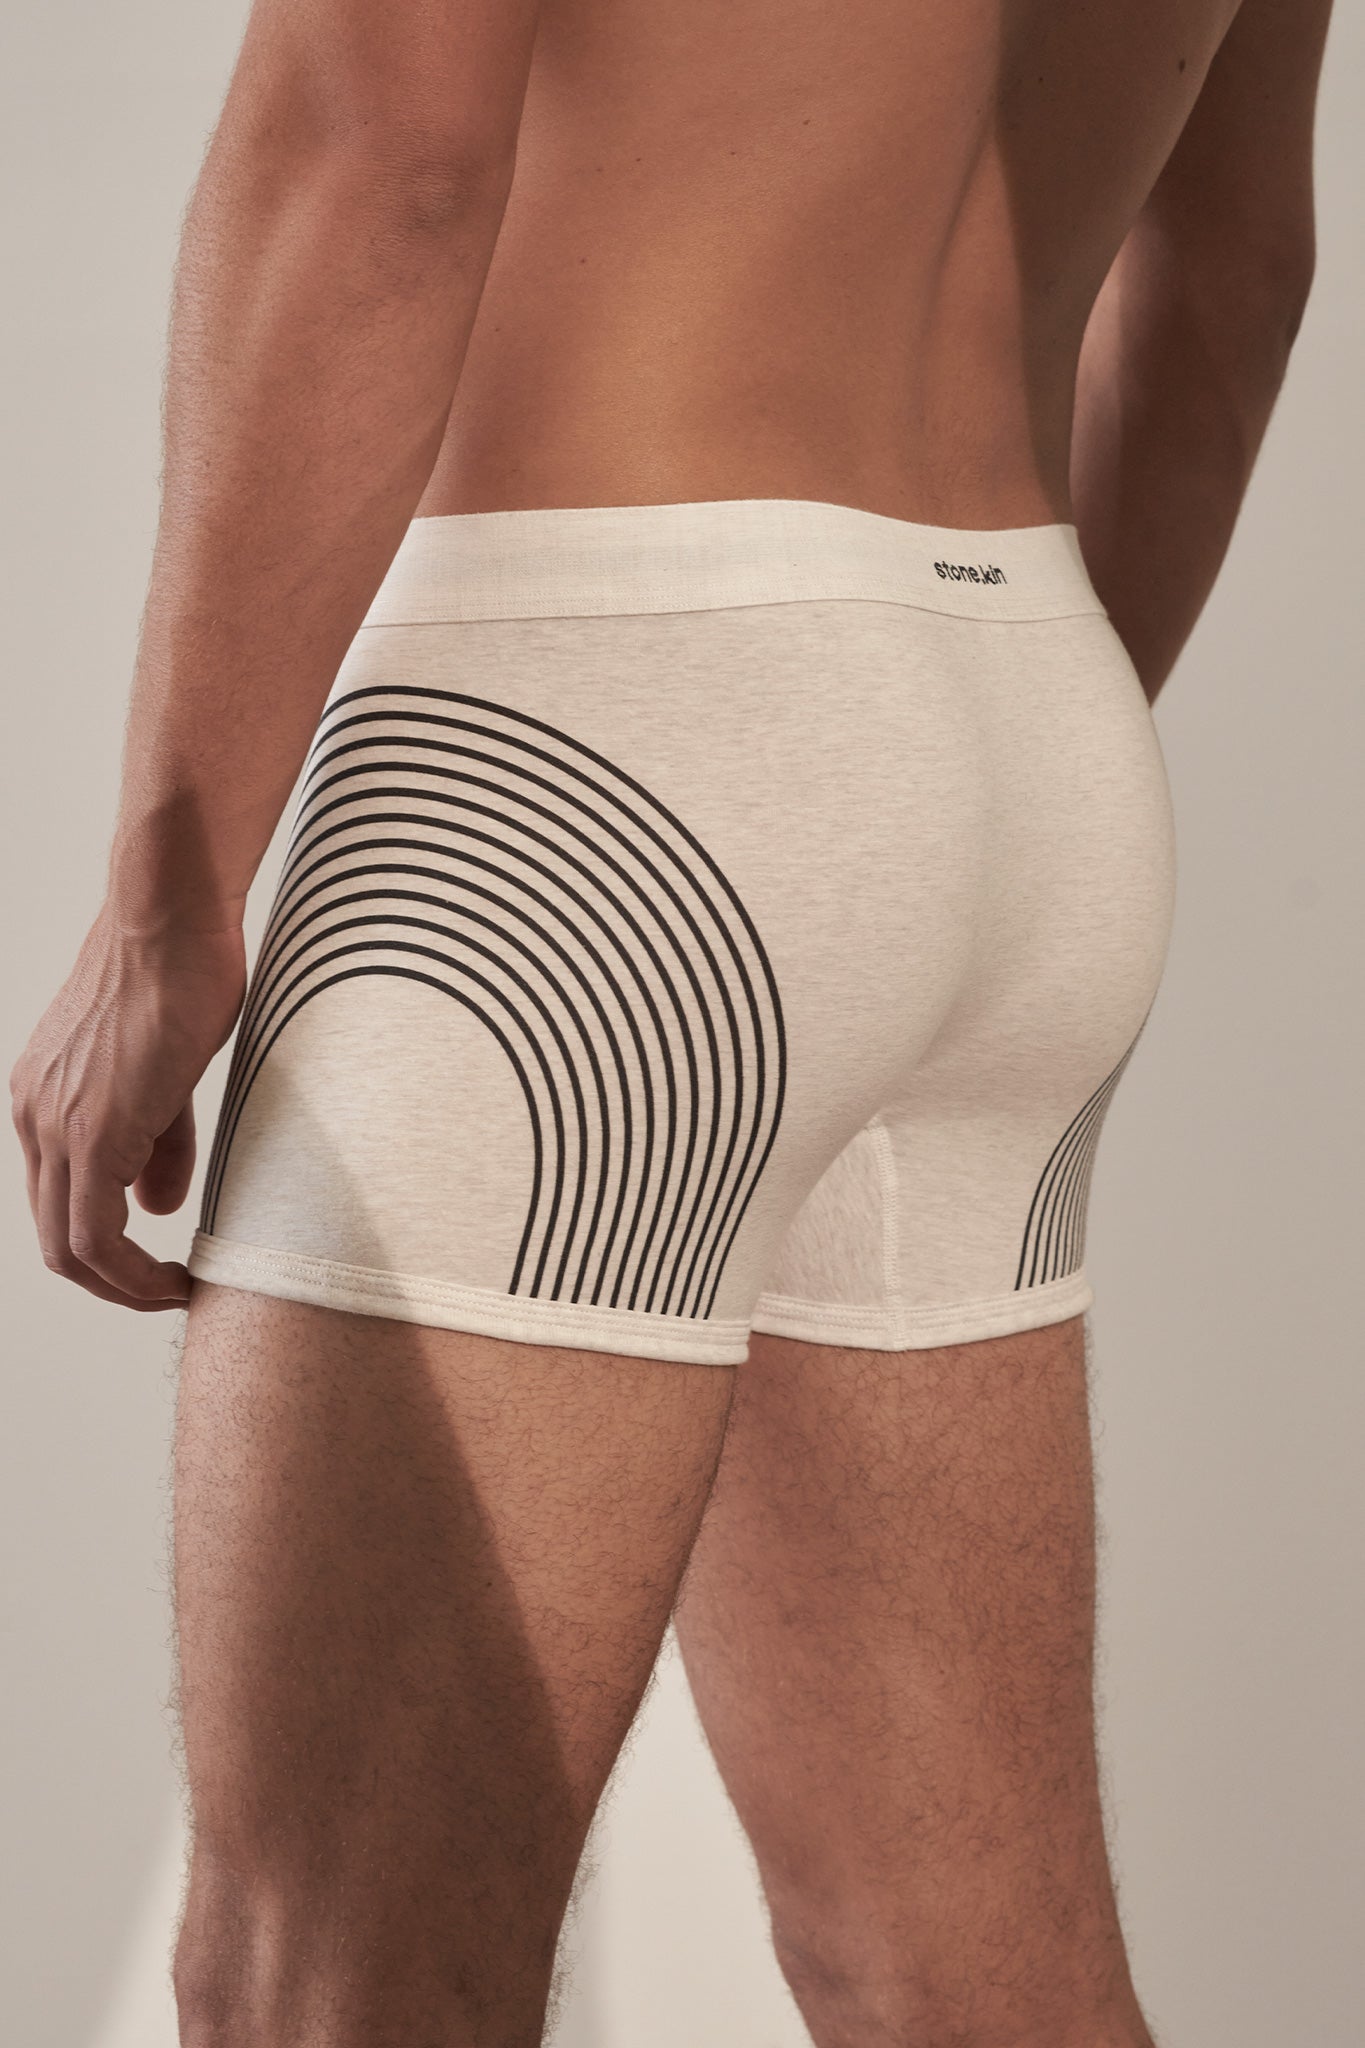 Stone.kin - Boxer Brief in Cotton Jersey - Bone with Lines